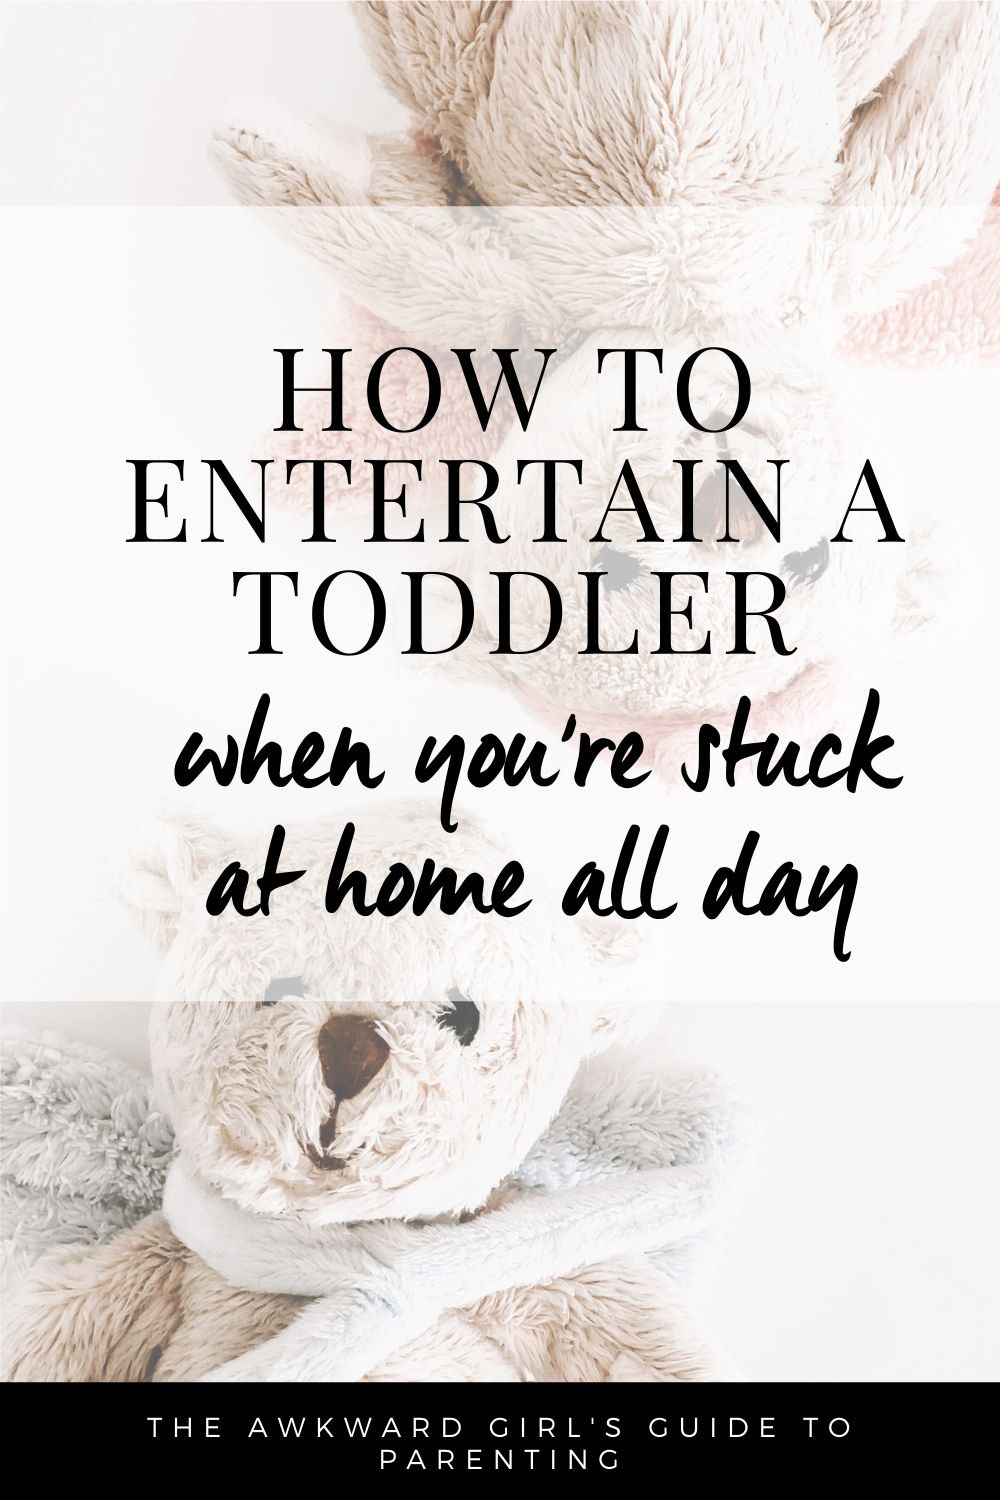 how to entertain a toddler when you're stuck at home all day